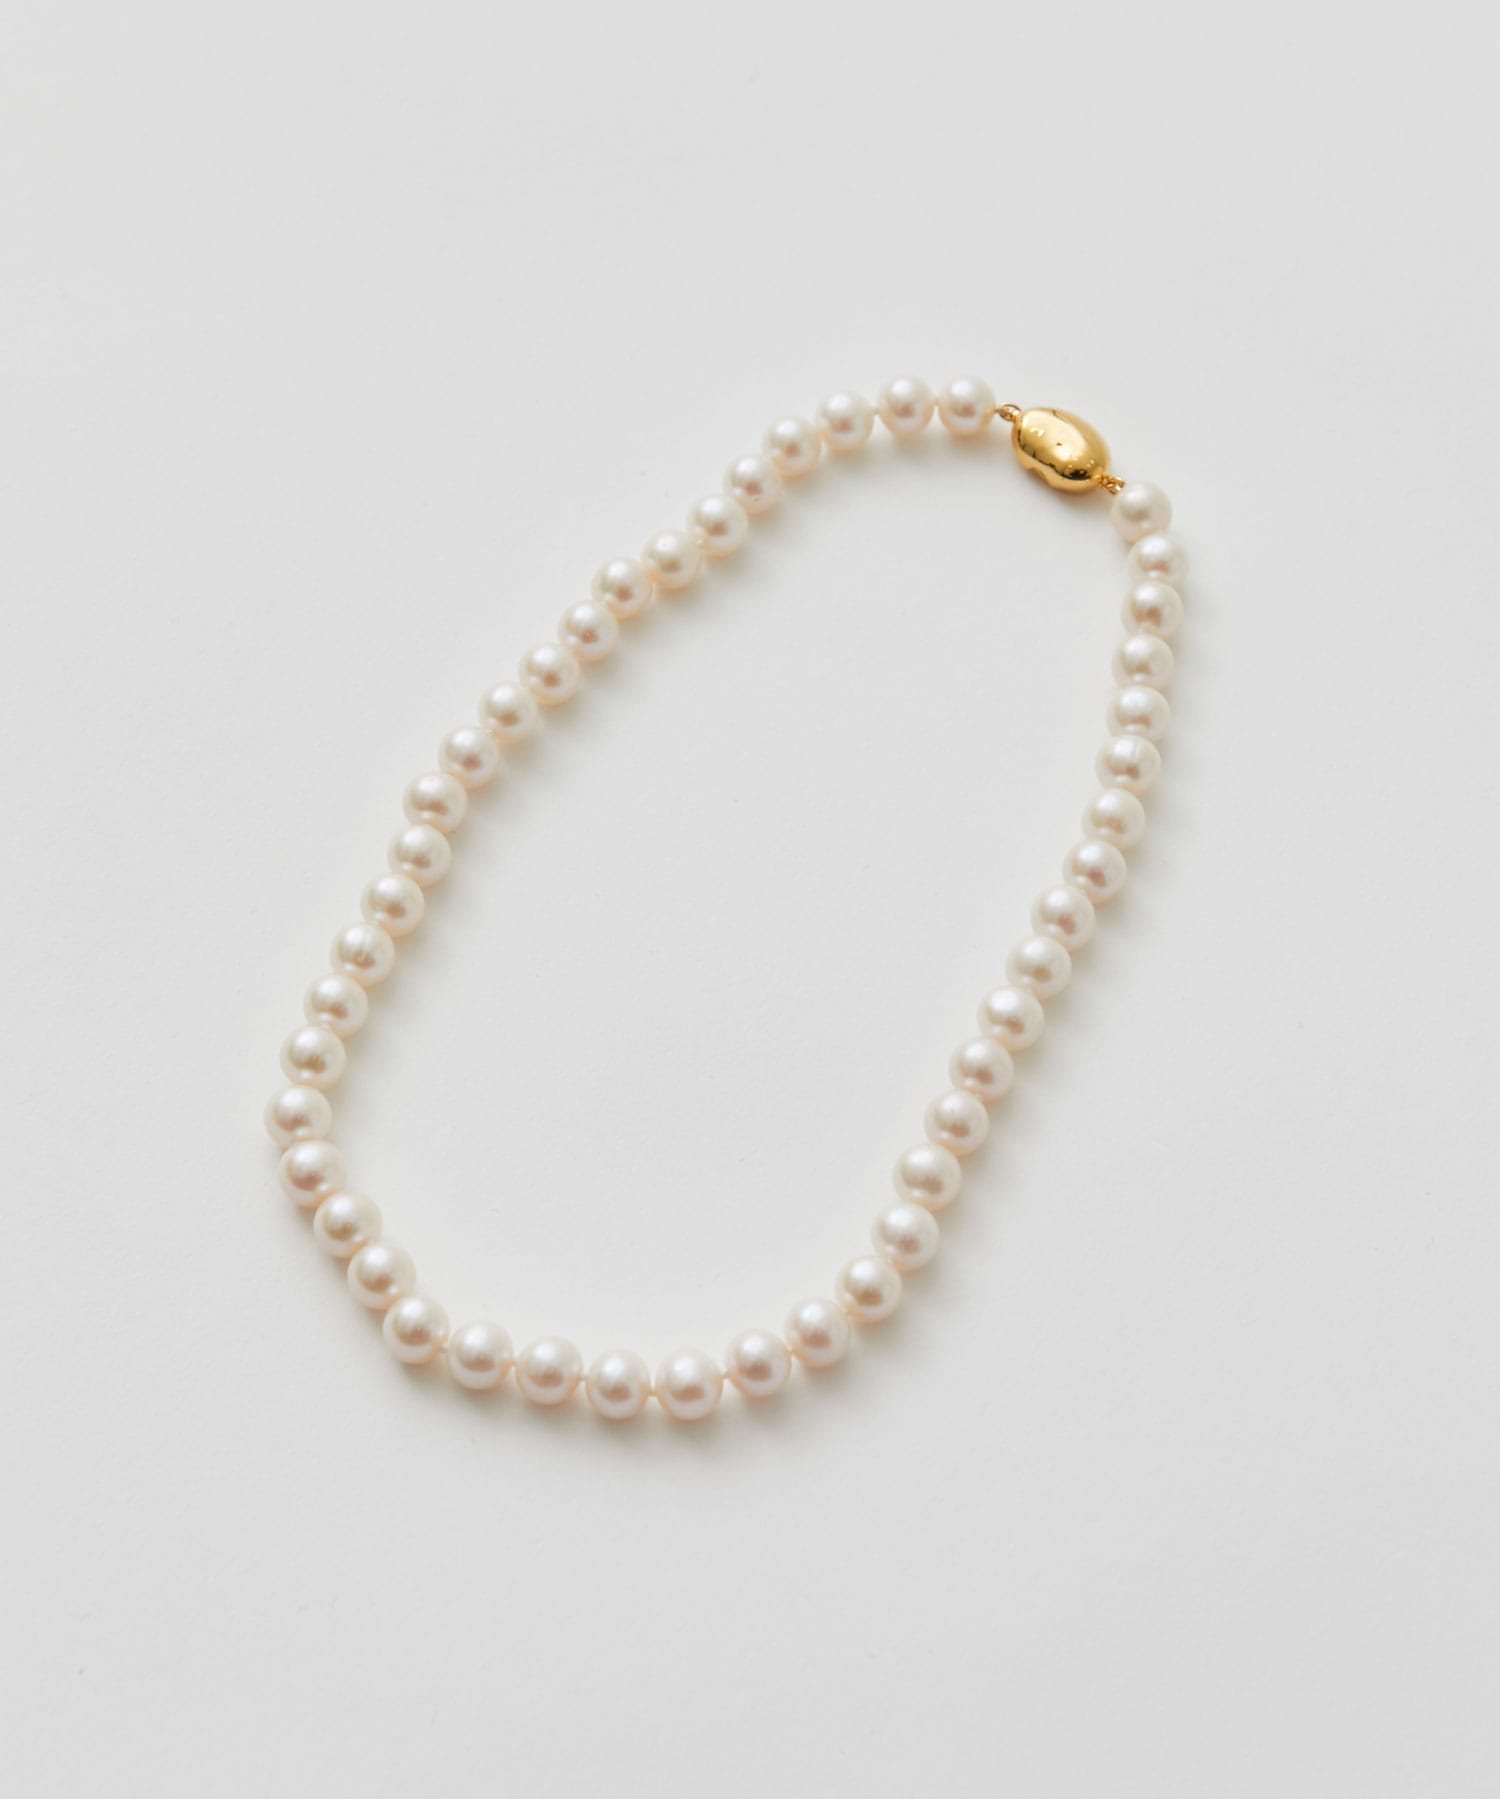 Madame pearl necklace